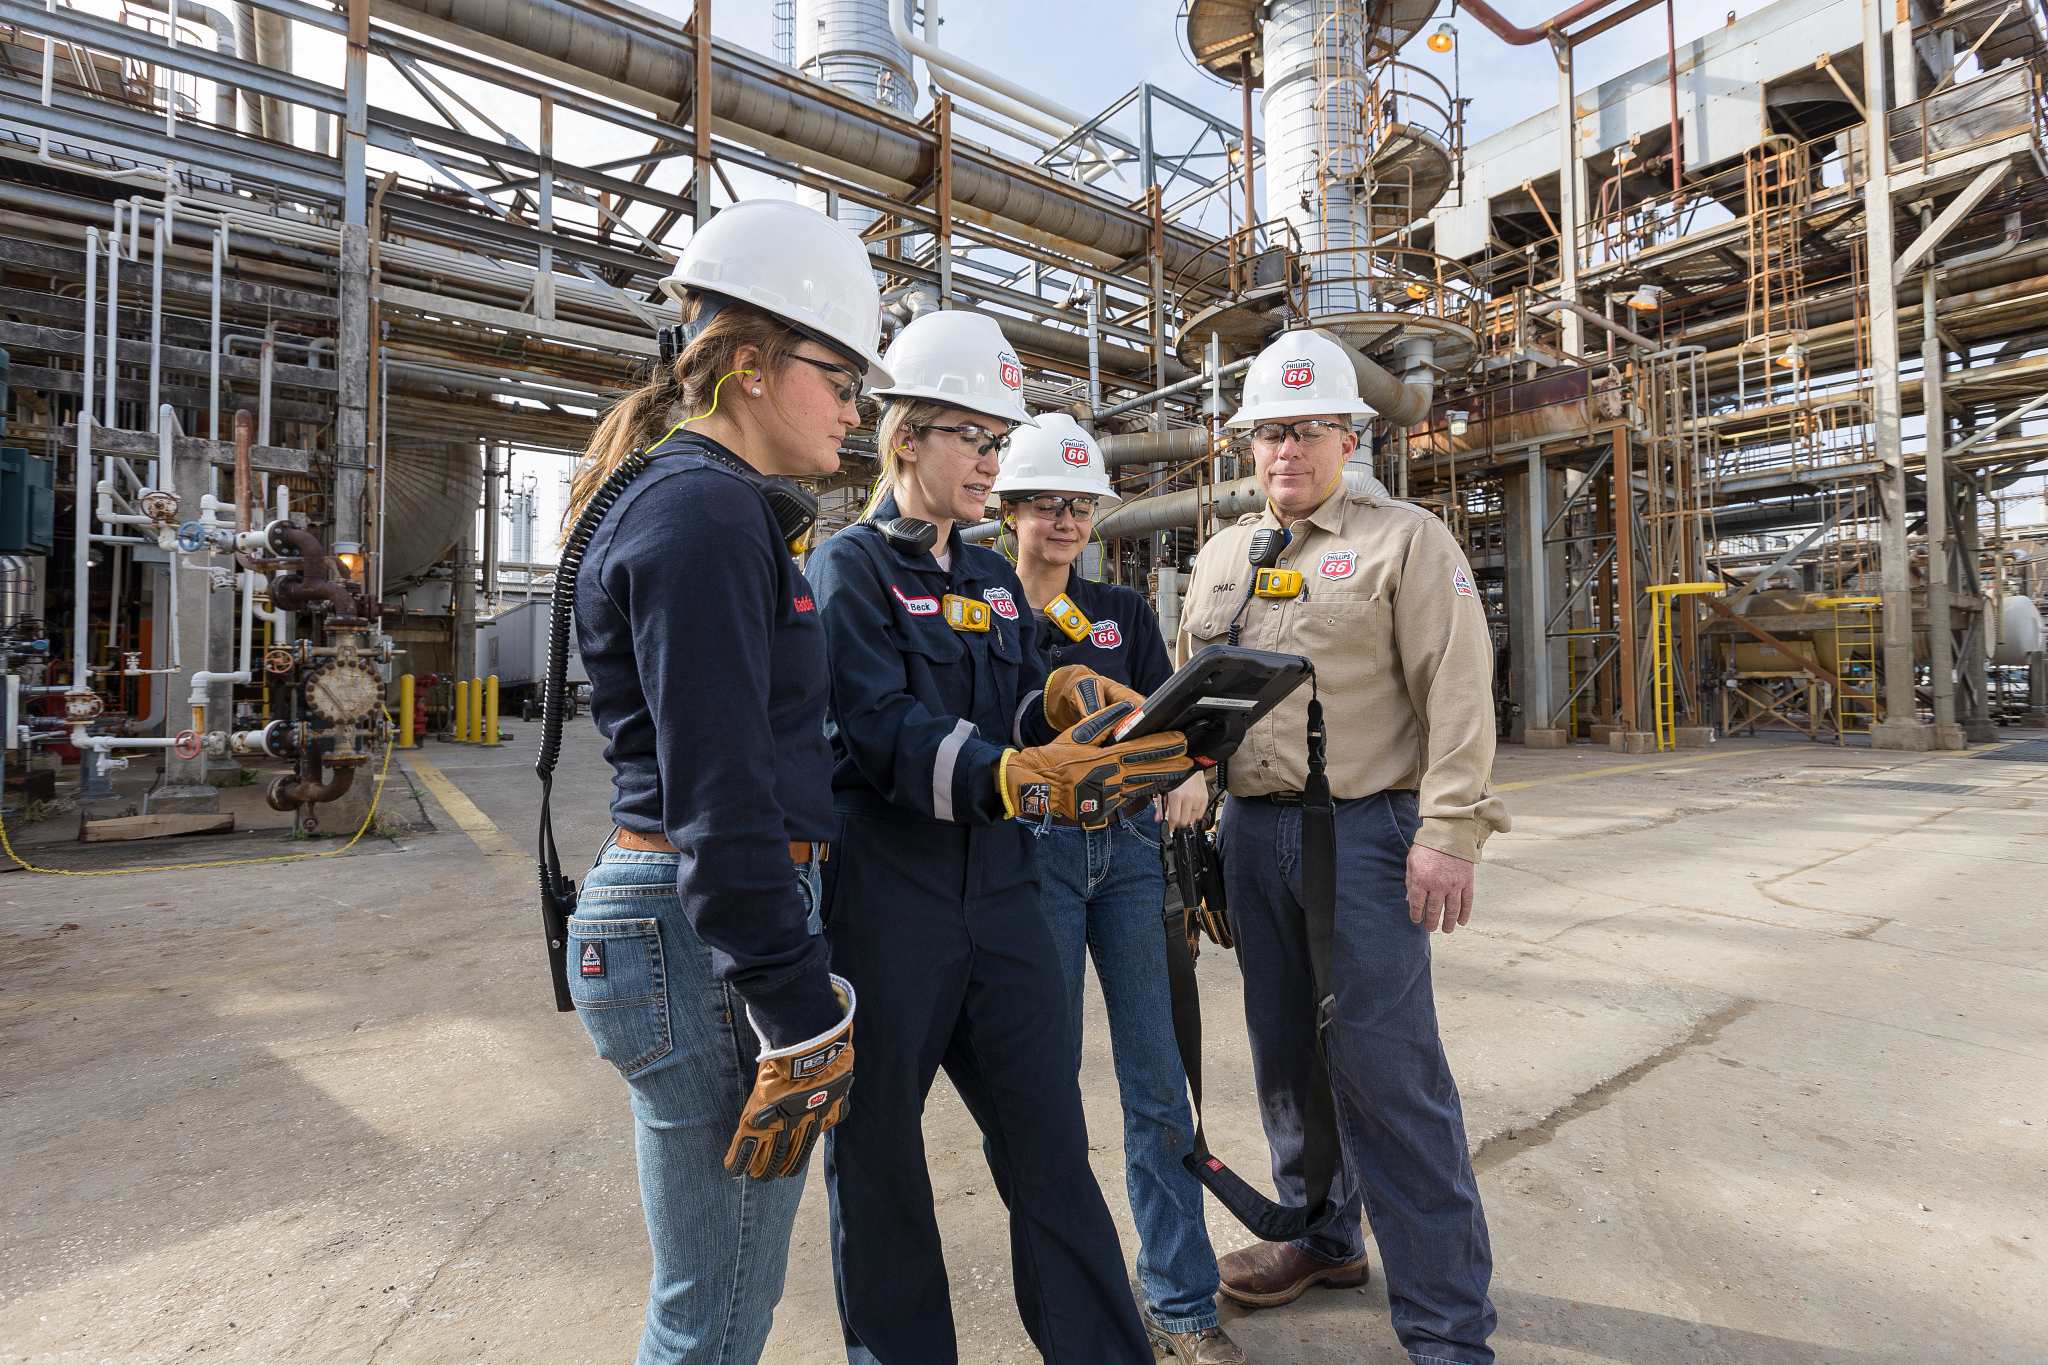 employees at Lake Charles Refinery in Louisiana, holding digital tools